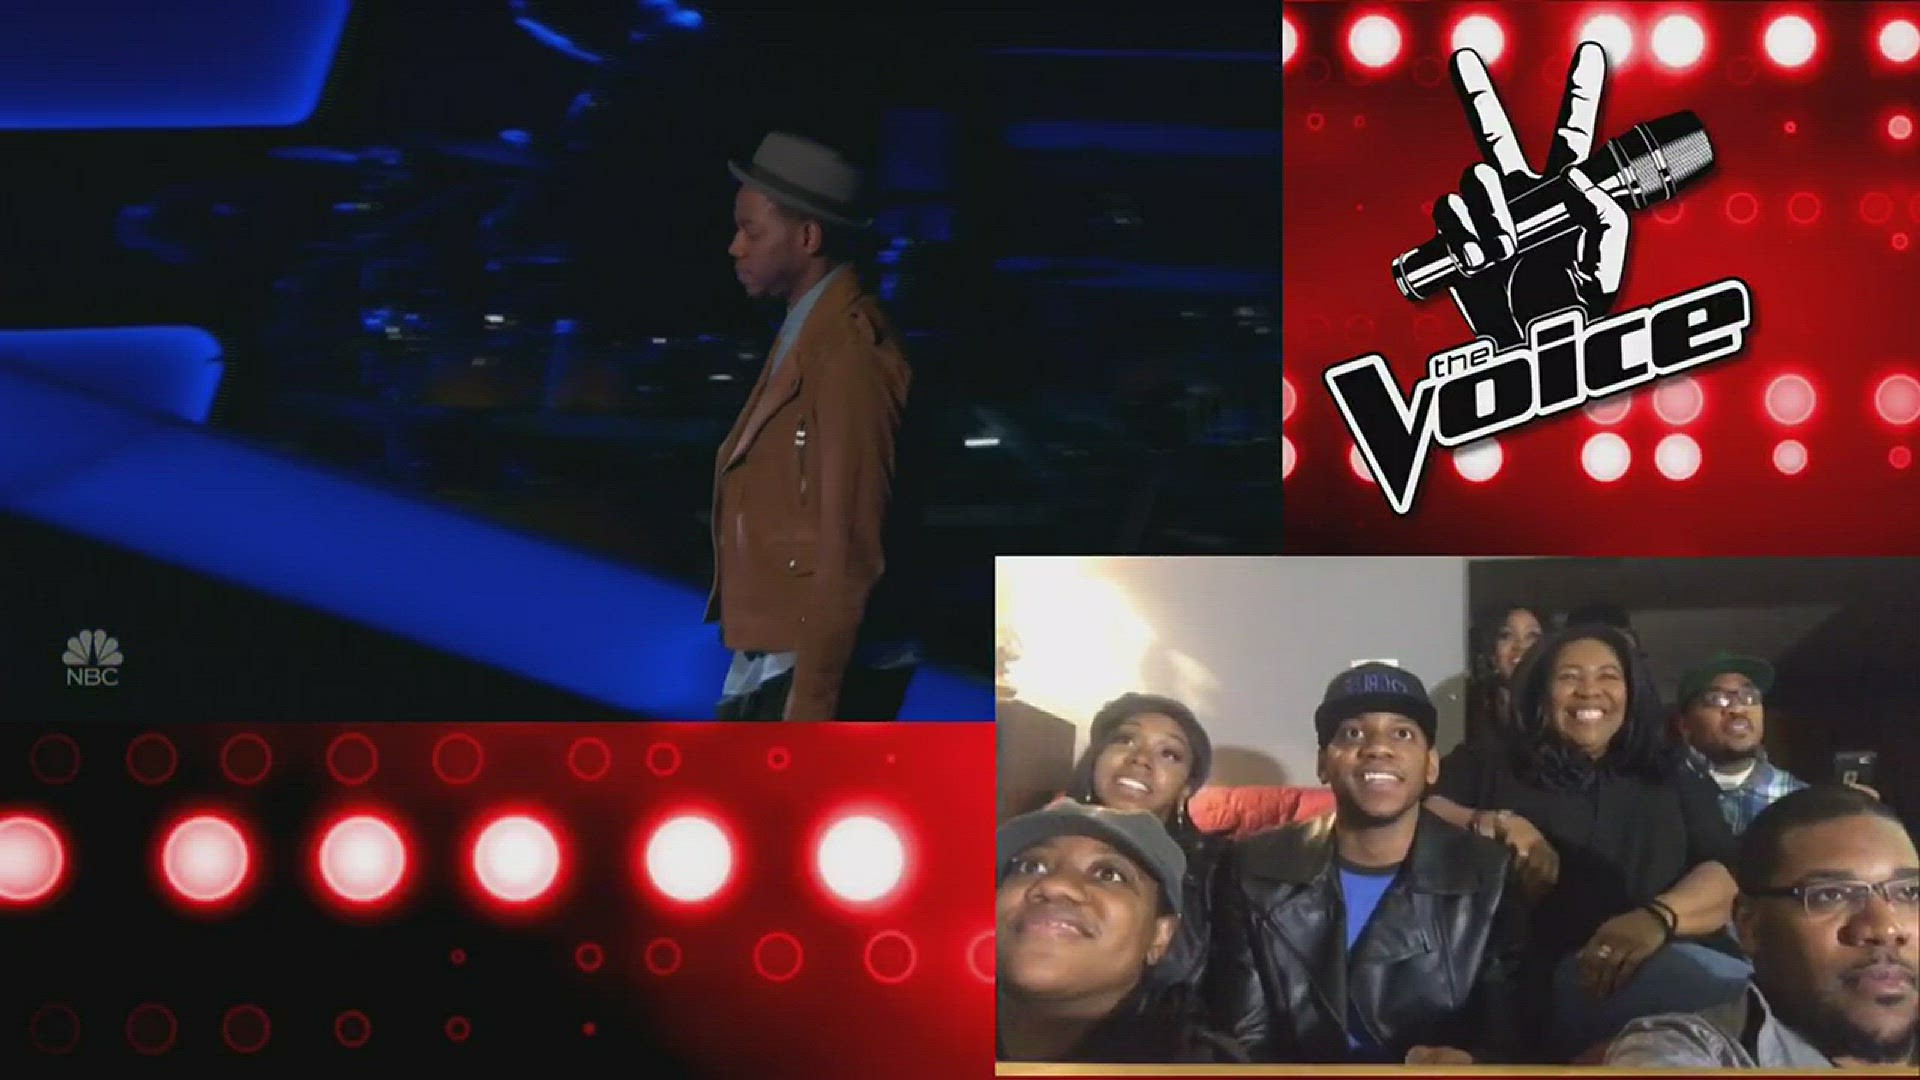 A side-by-side view of Chris Blue's blind audition on The Voice and his reaction watching the show.